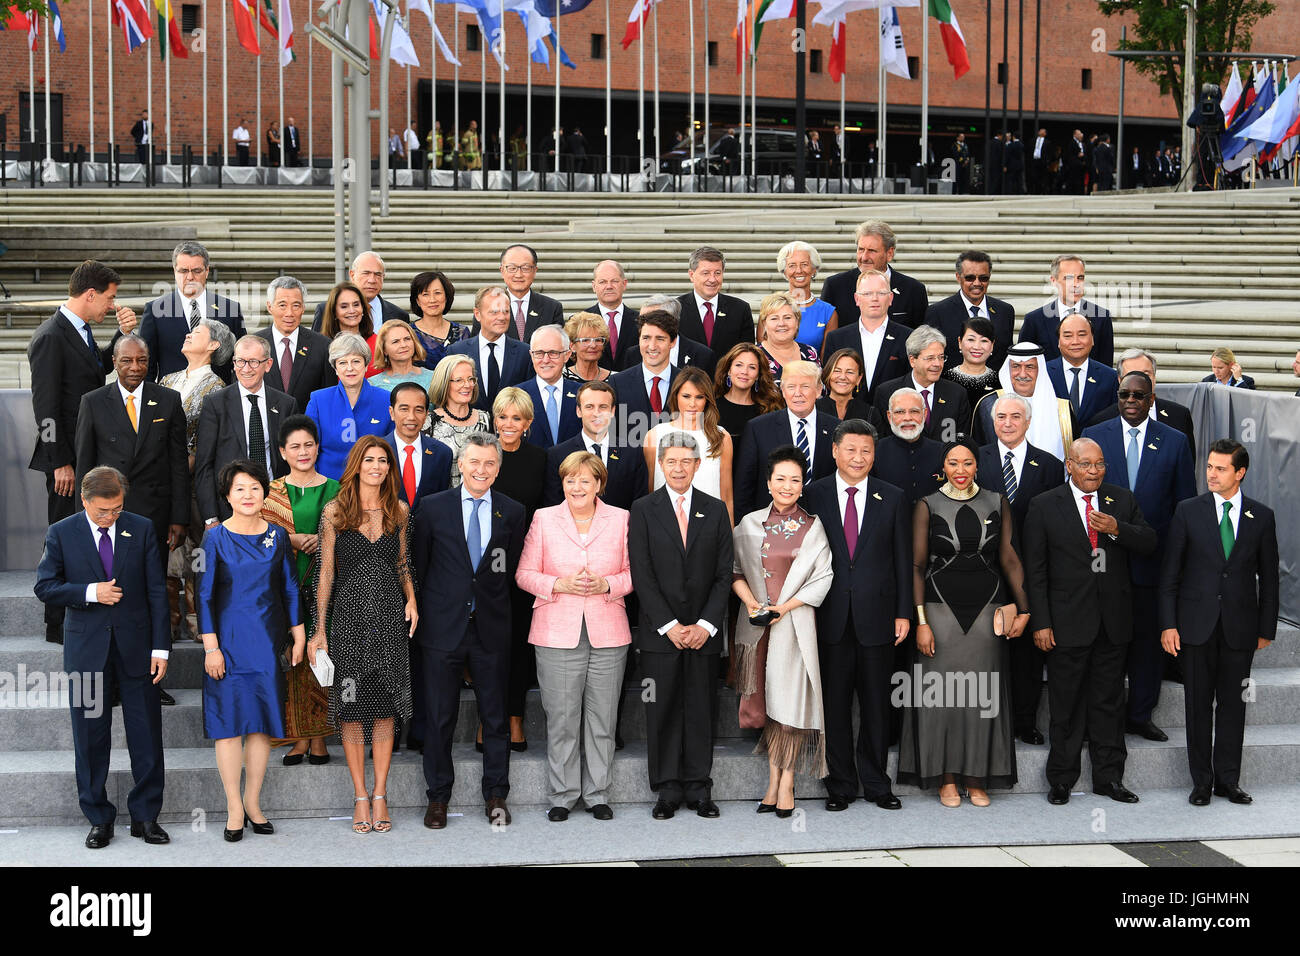 G20 leaders and their spouses arrive to attend a concert at the Elbphilharmonie concert hall in Hamburg. Stock Photo